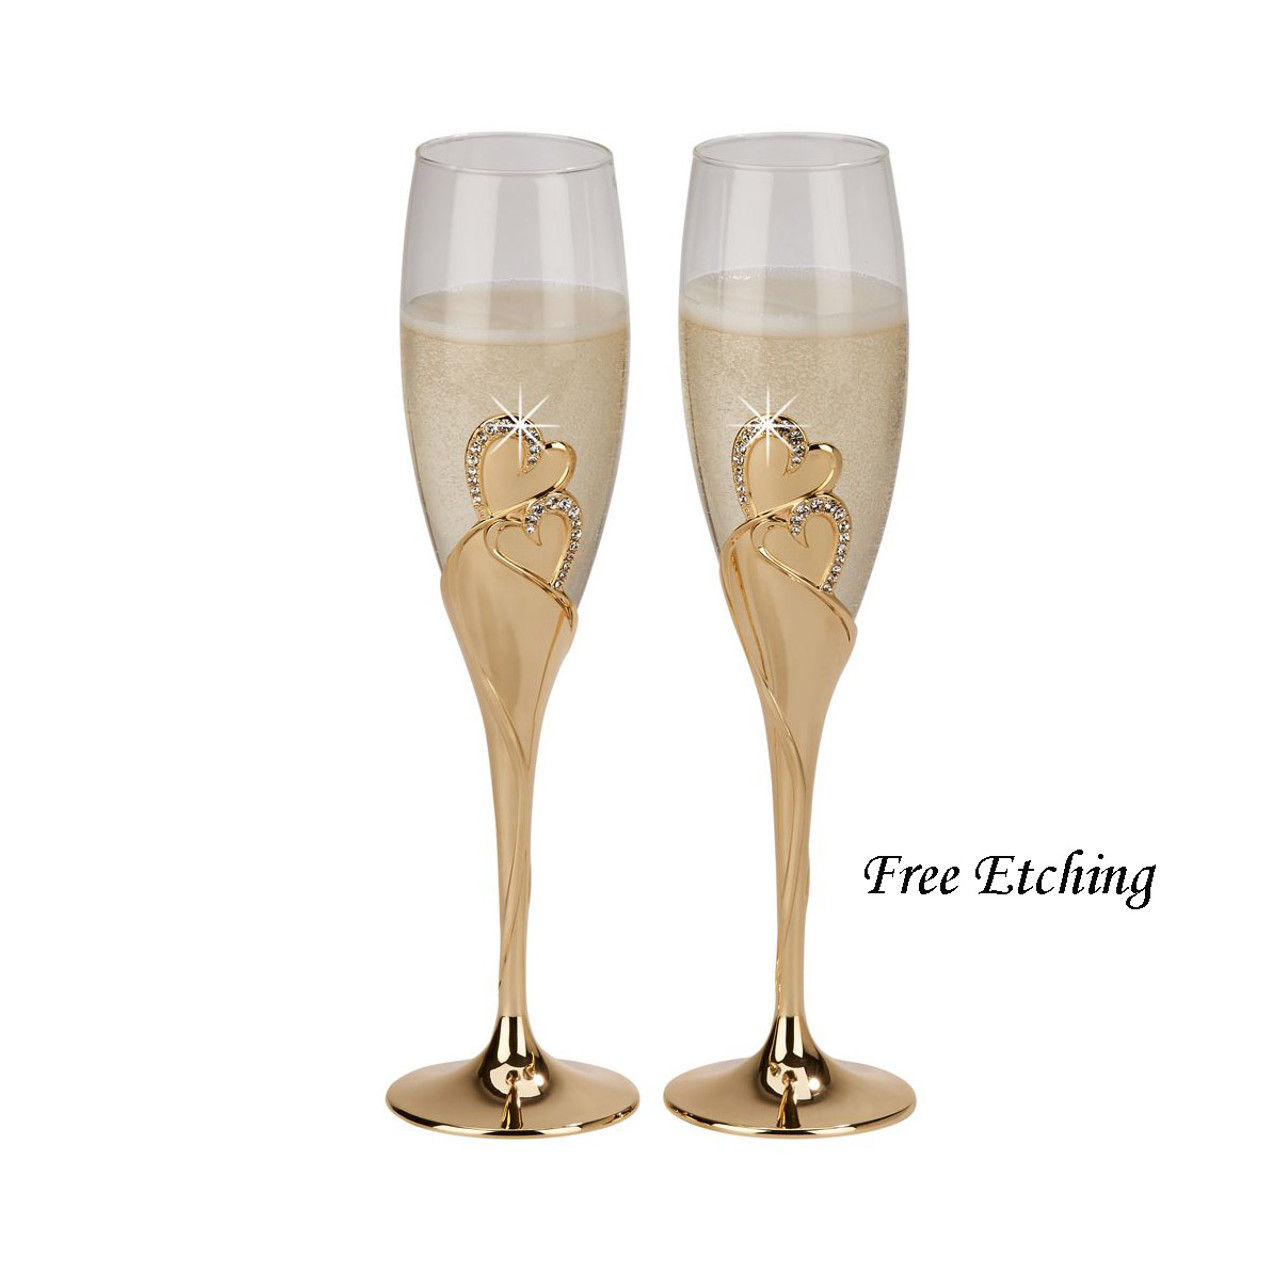 Wedding Gifts Champagne Flutes Set of 2, Champagne Glasses for